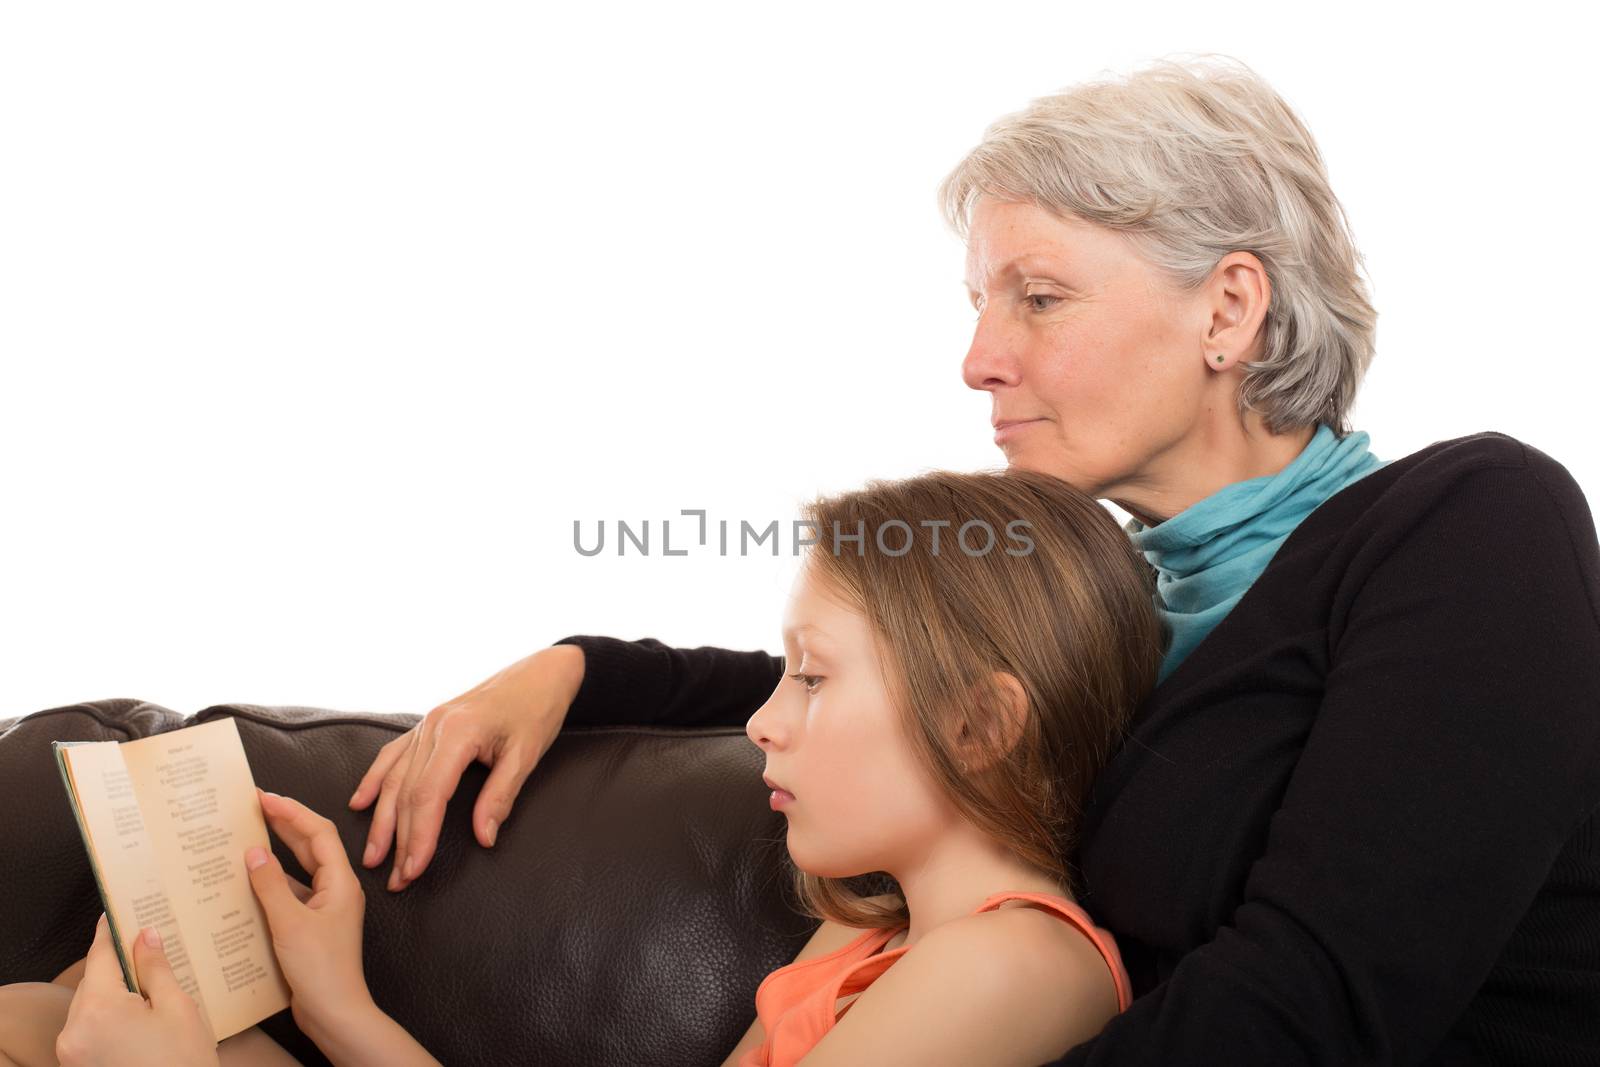 Grandmother and her granddaughter read with serenity a great story in a brown leather sofa. Isolated on white background.